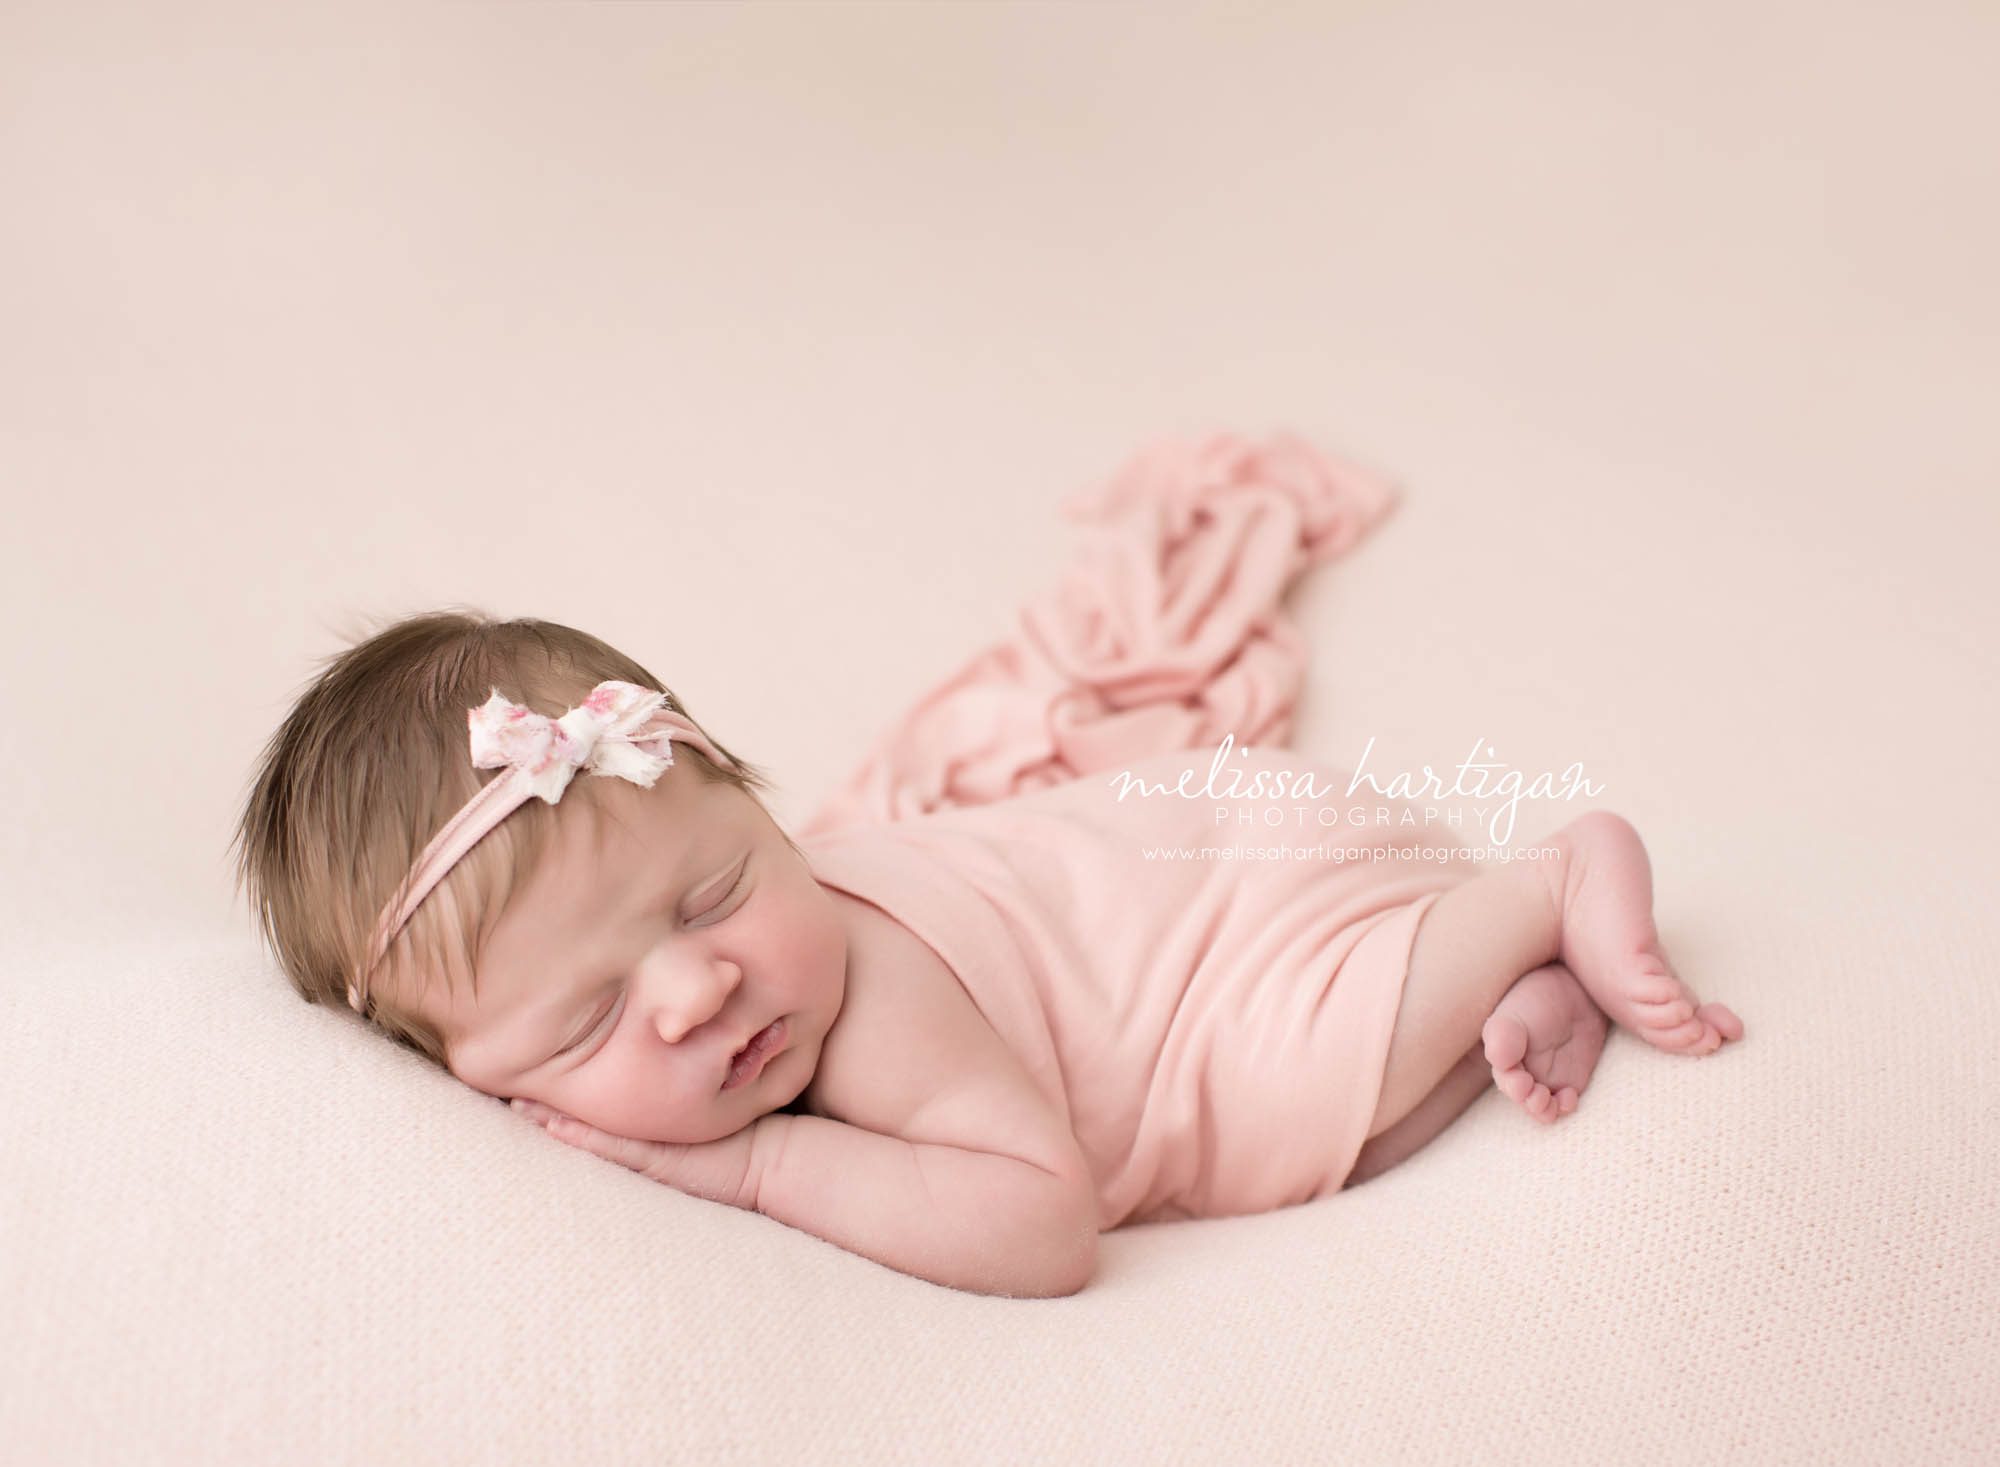 Melissa Hartigan Photography Connecticut Newborn Photographer Coventry Ct Middlefield CT baby Fairfield county Newborn and maternity CT photographer Baby girl pink headband with pink blanket sleeping head on hands